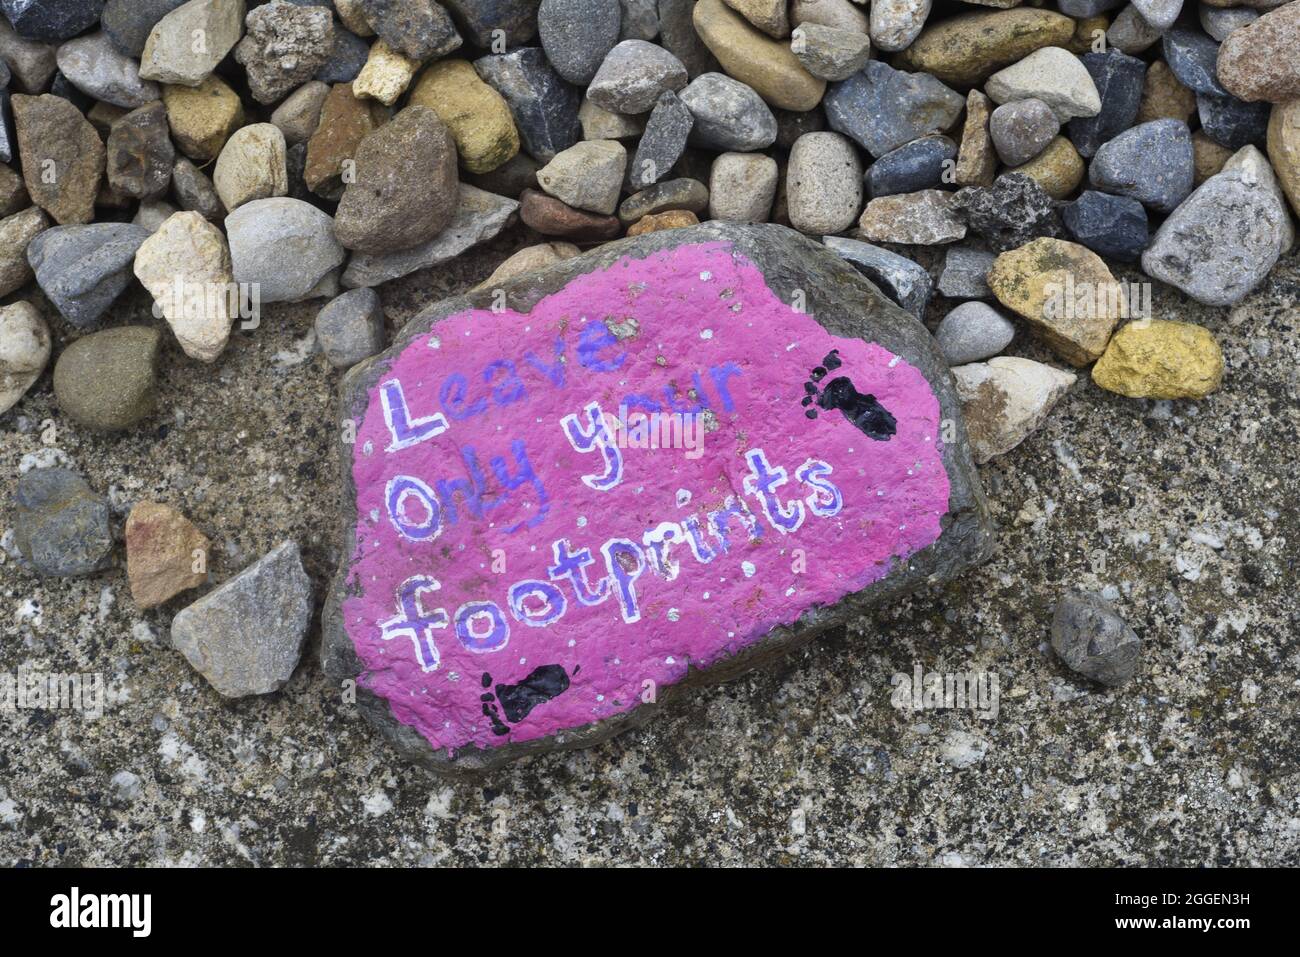 Leave only your footprints, painted on a stone. With footprints on a pink background. On a gravel or stone drive. Environmental concept no people. Stock Photo